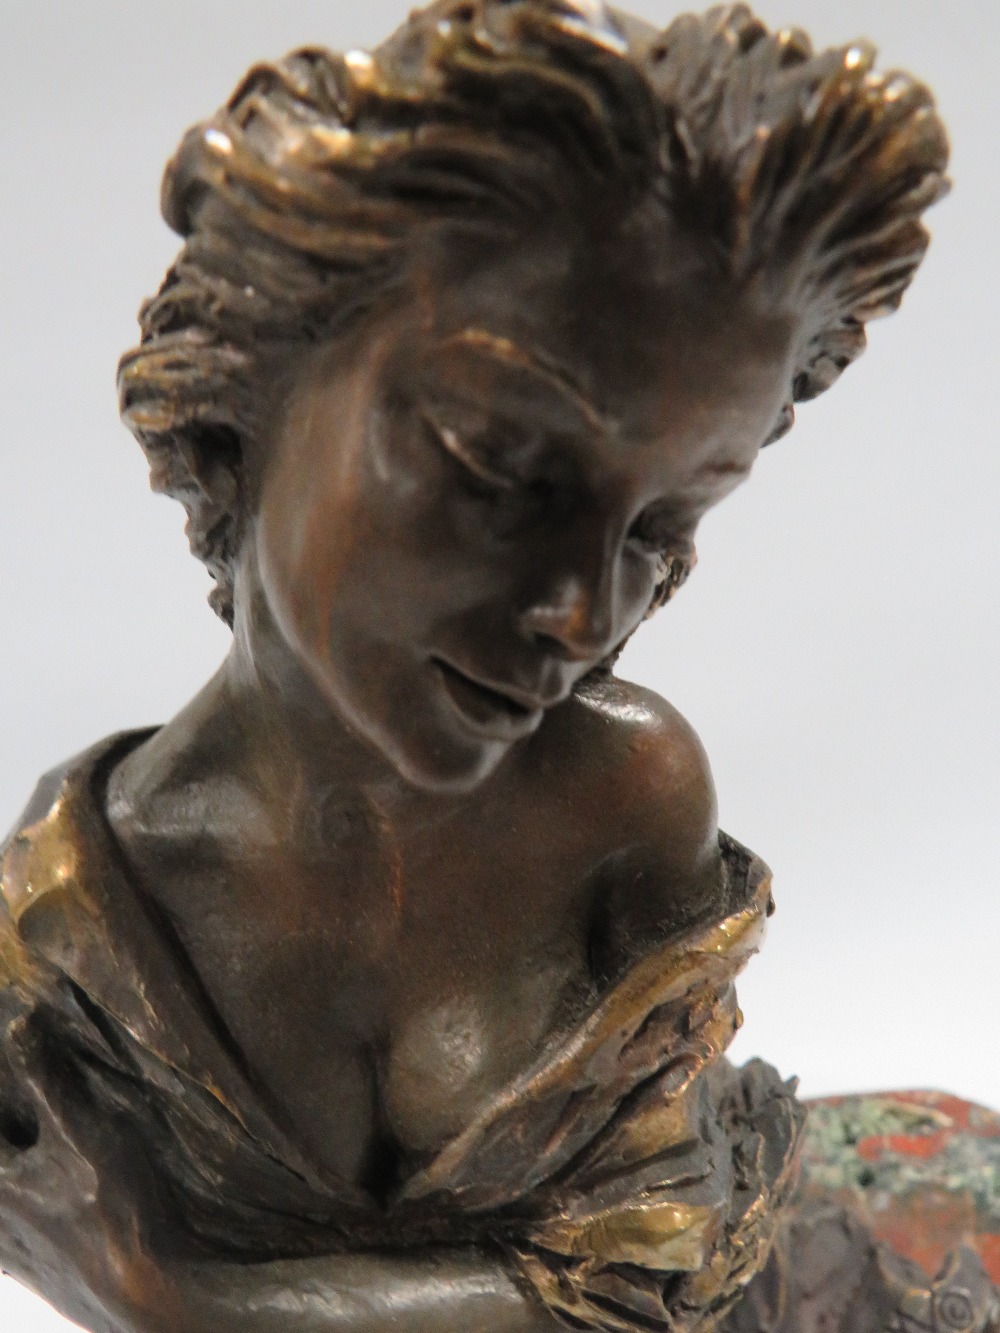 AN EBANO BRONZED SCULPTURE FROM THE VIDAL COLLECTION DEPICTING A KNEELING SEMI NUDE GIRL, raised - Image 2 of 3